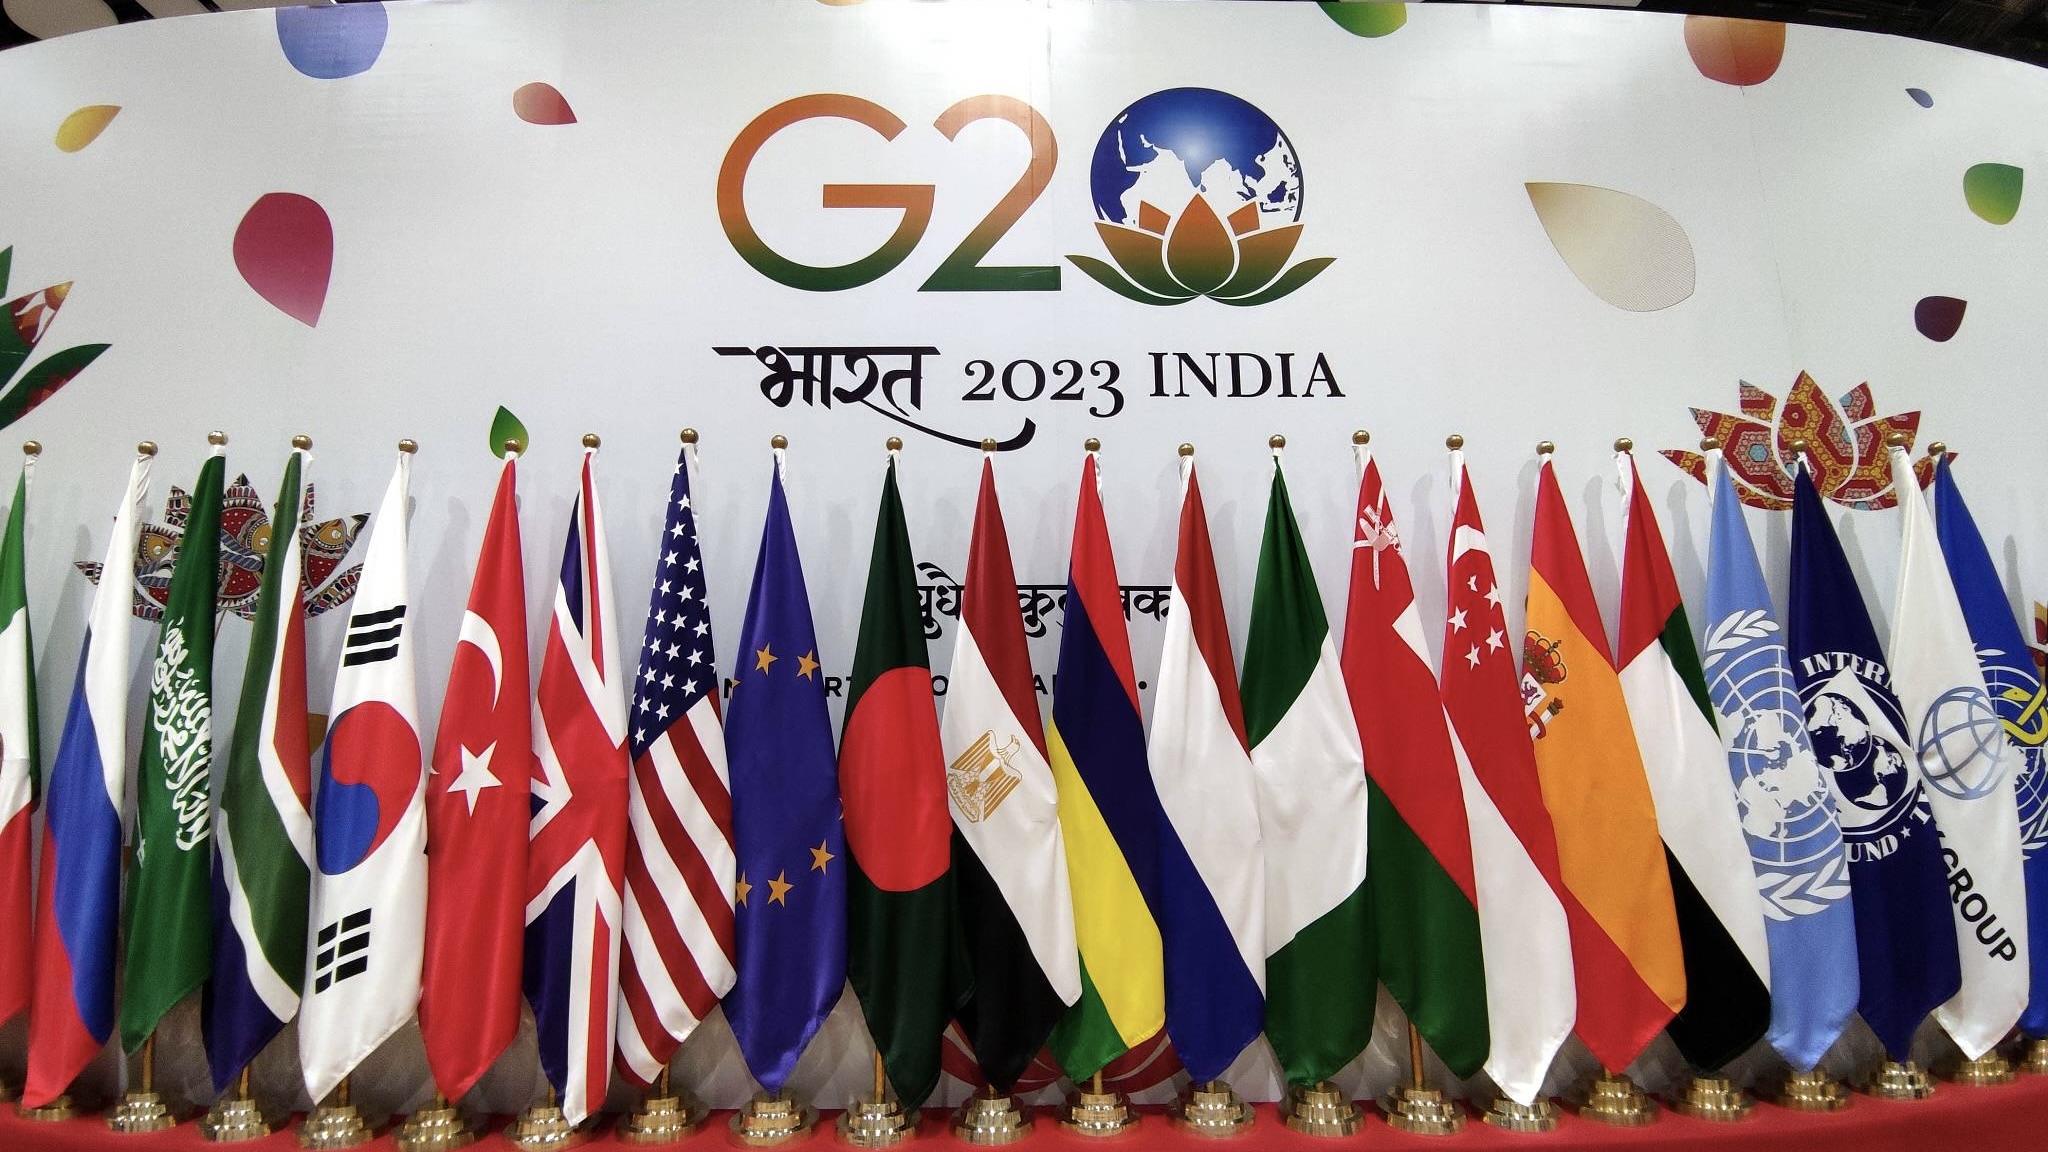 Africa Union joins G20: ensuring African voices are heard and respected globally